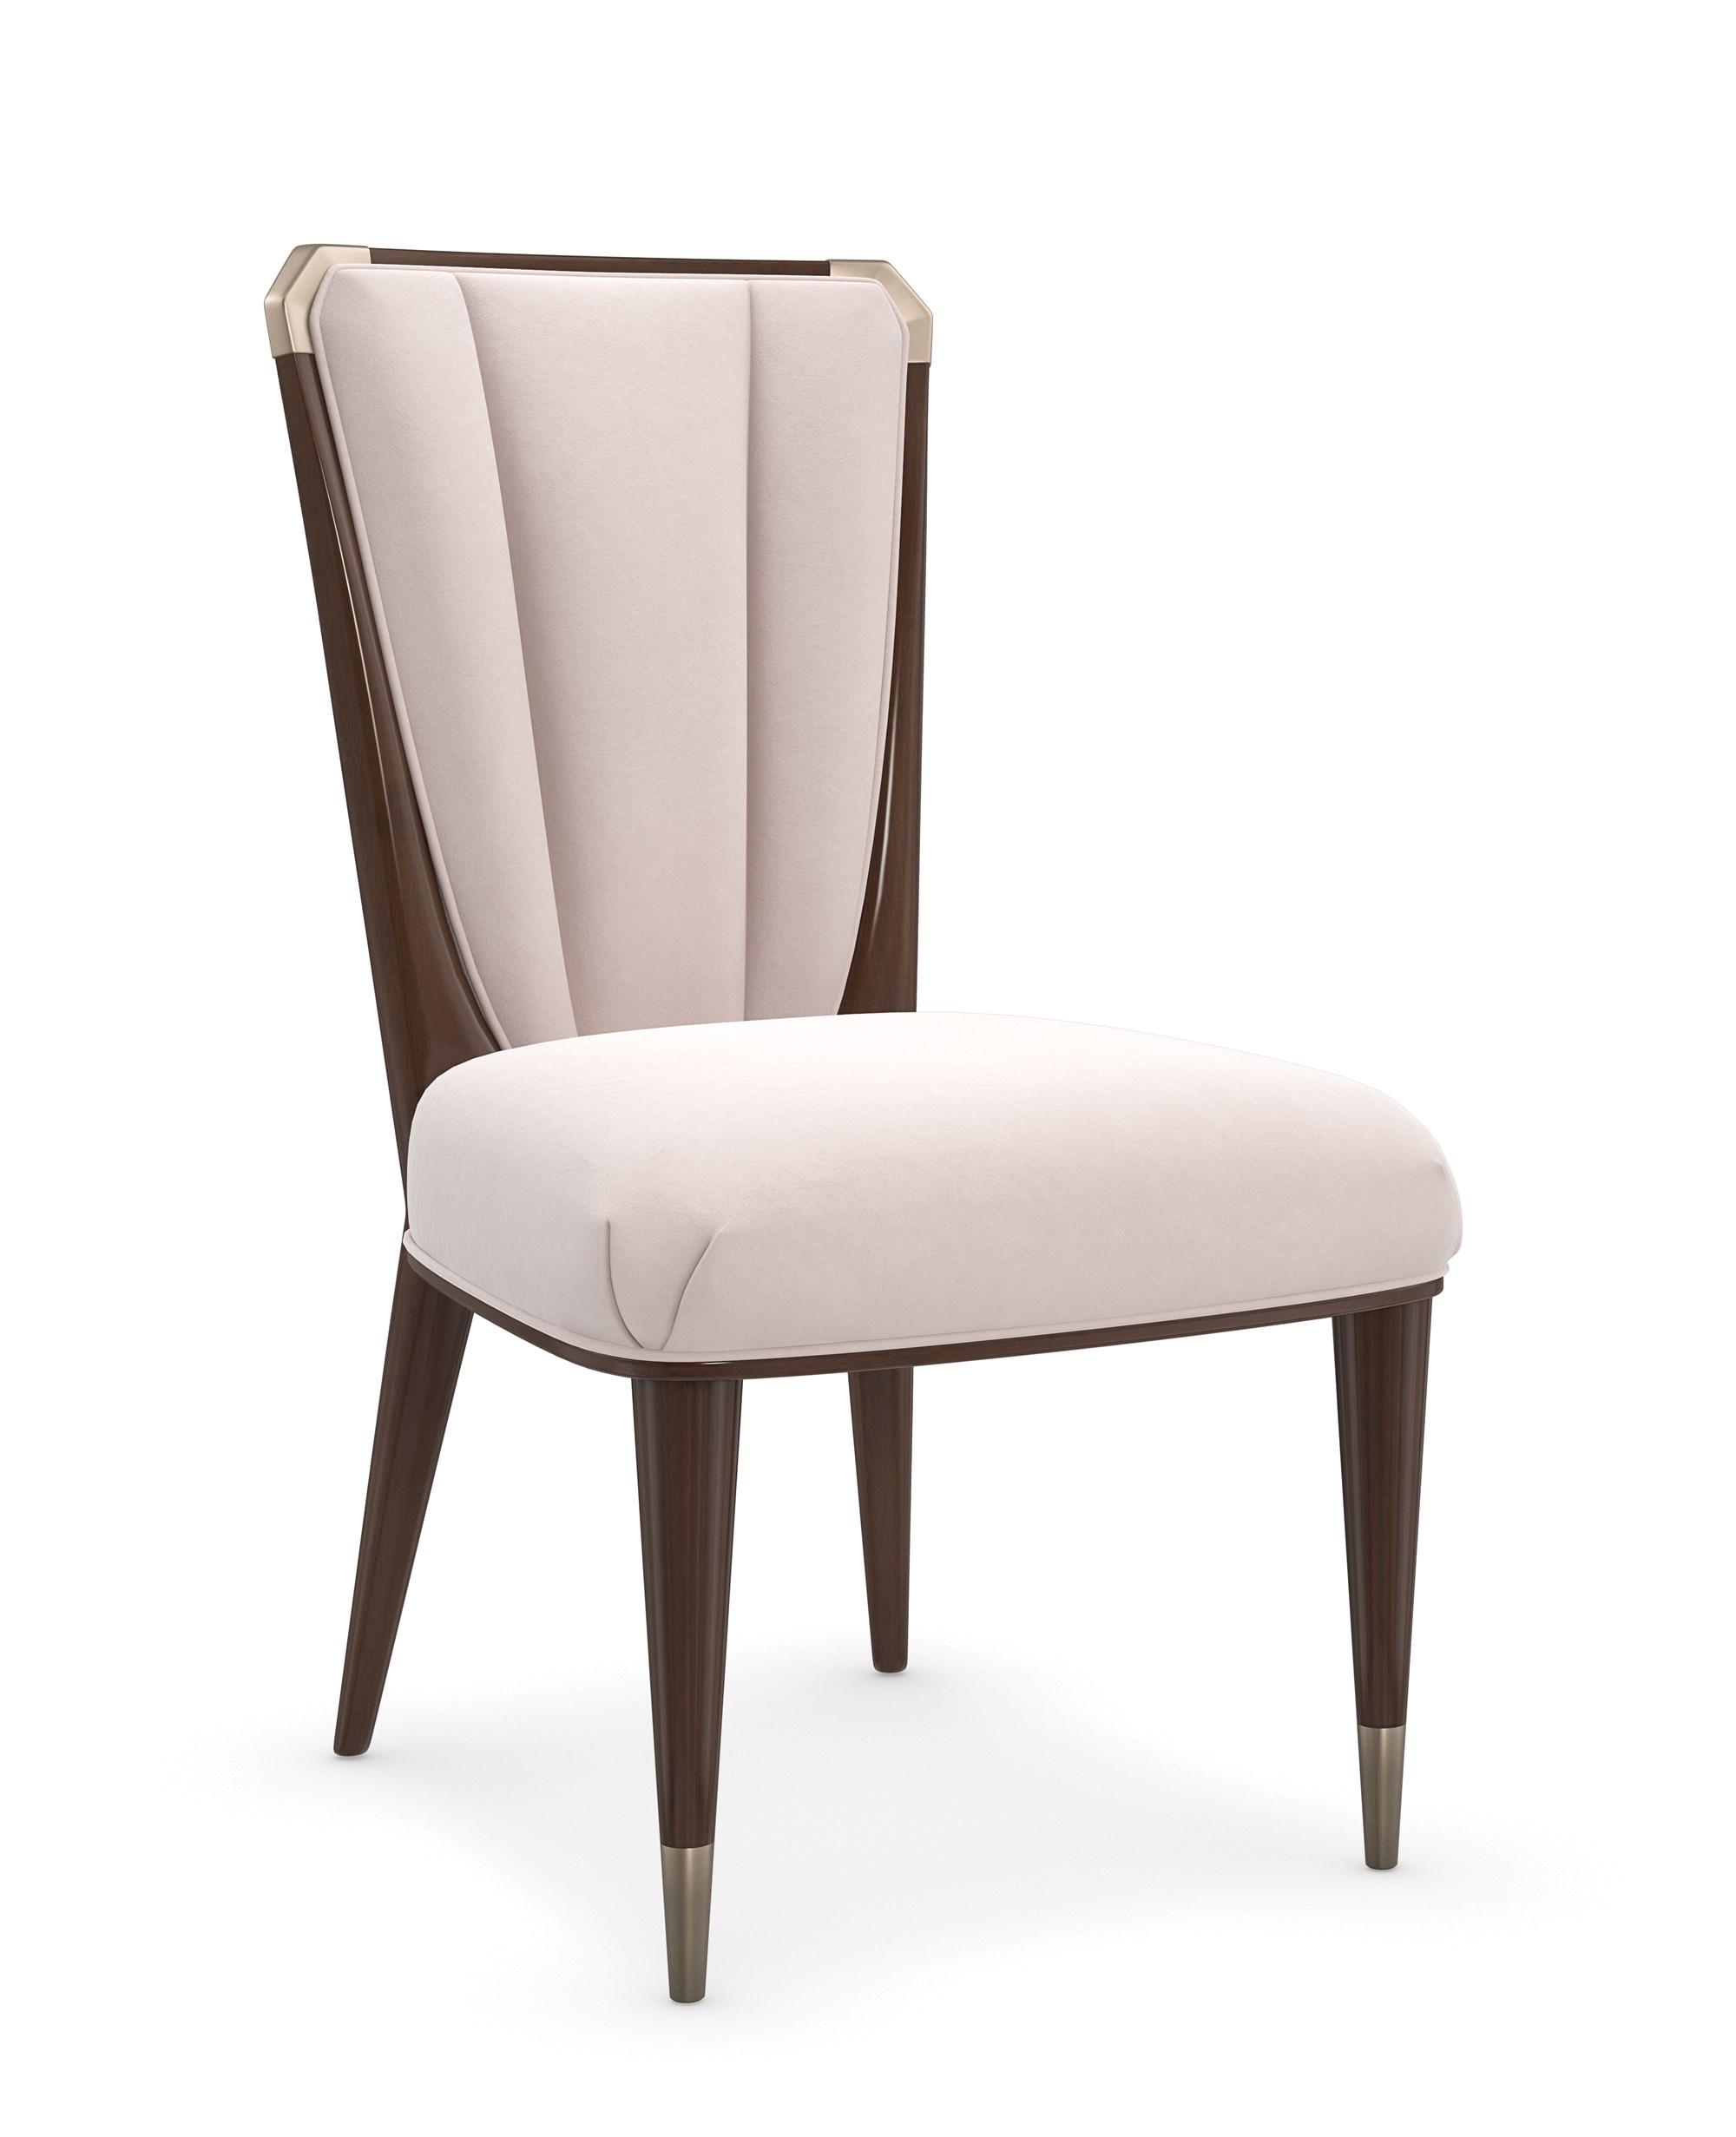 Contemporary Dining Chair Set THE OXFORD SIDE CHAIR C102-422-281-Set-2 in Cream, Brown Fabric